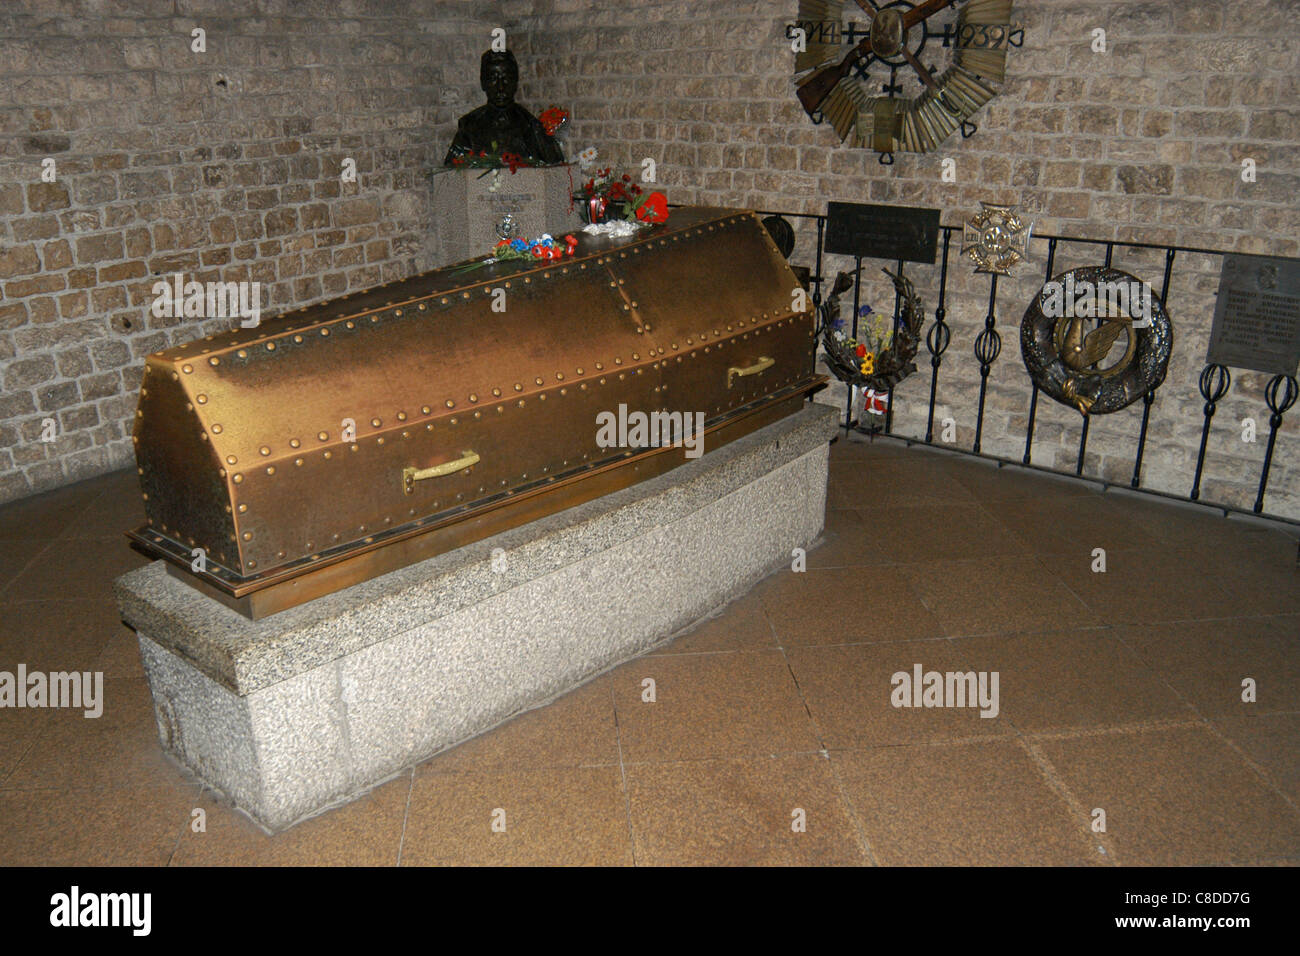 Tomb of Polish statesman Jozef Pilsudski in the Crypt of the Wawel Cathedral in Krakow, Poland. Stock Photo